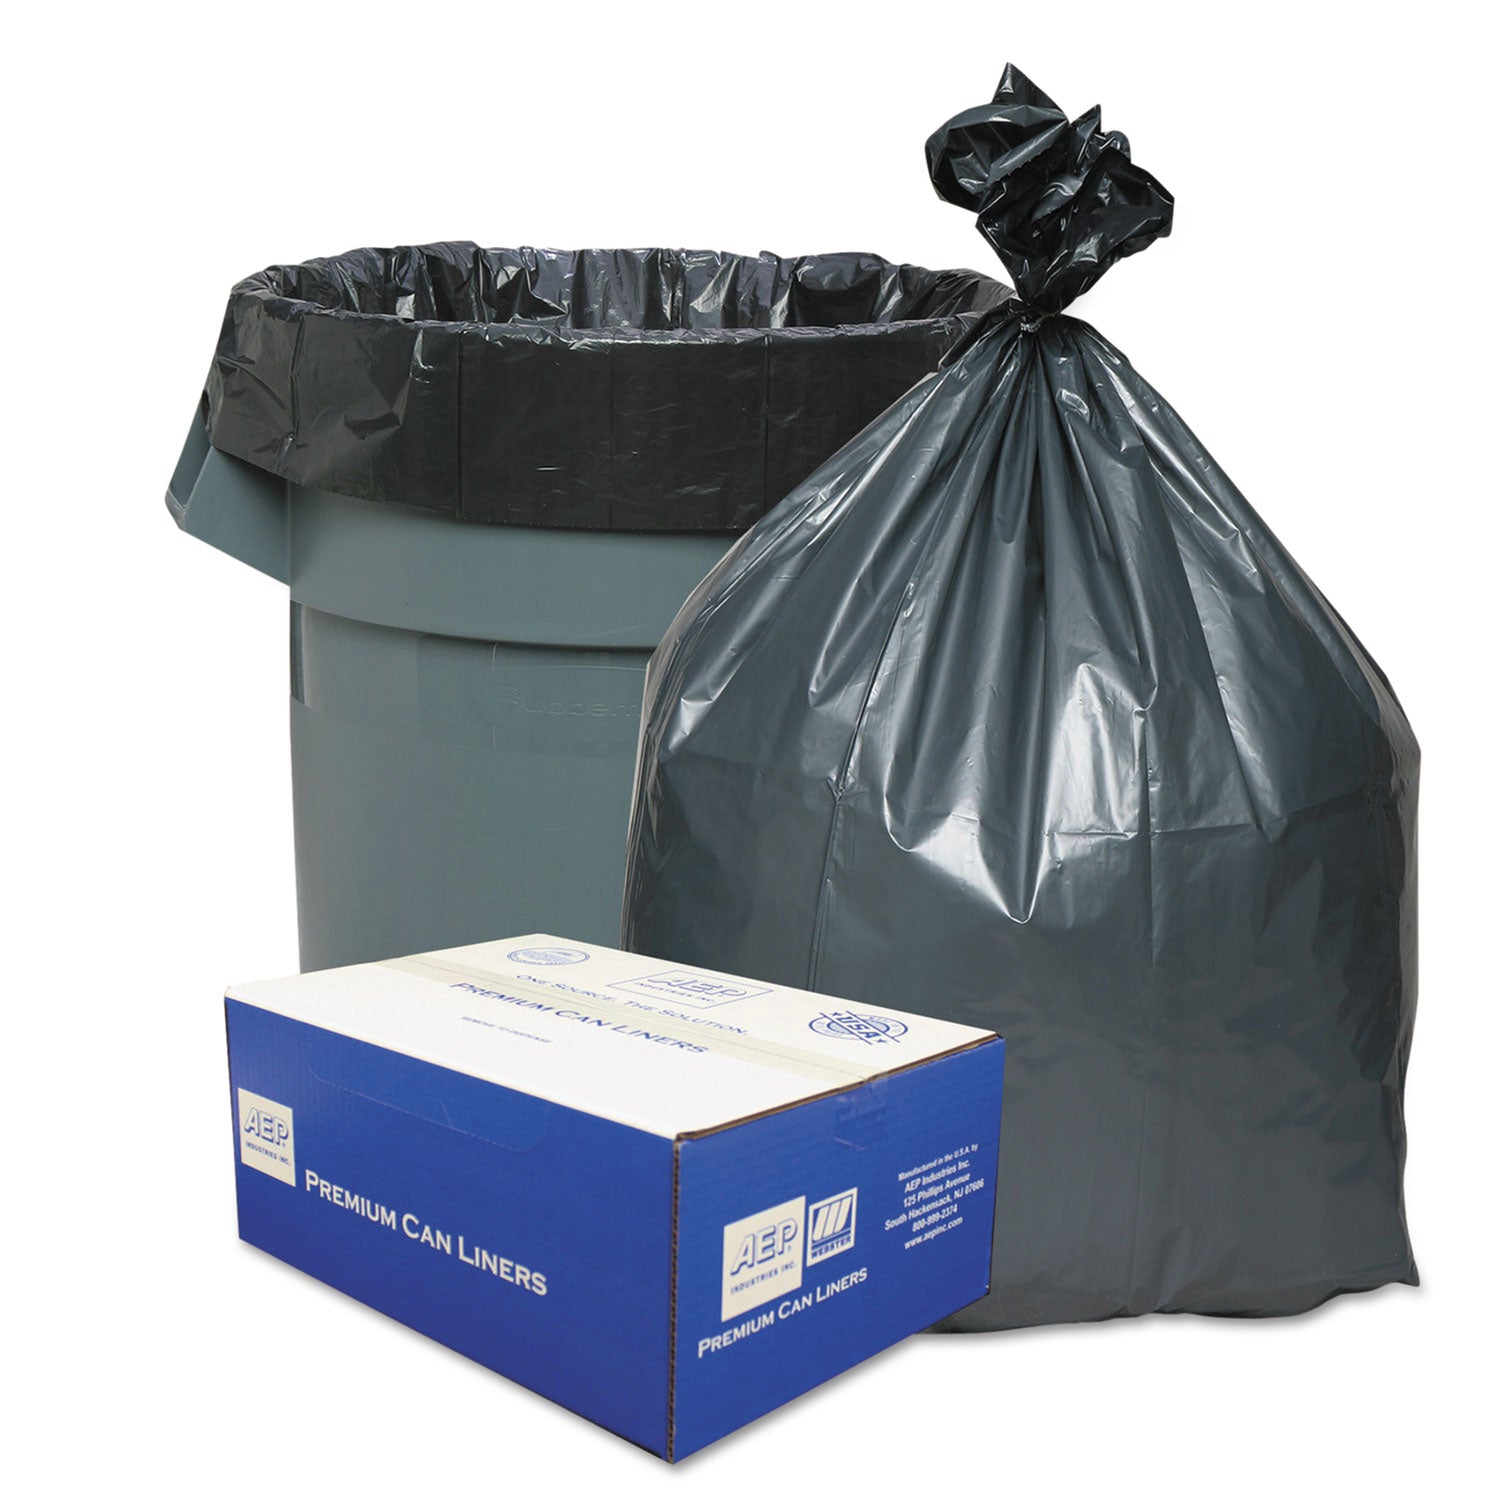 can-liners-56-gal-155-mil-43-x-48-gray-10-bags-roll-5-rolls-carton_wbipla4770 - 1